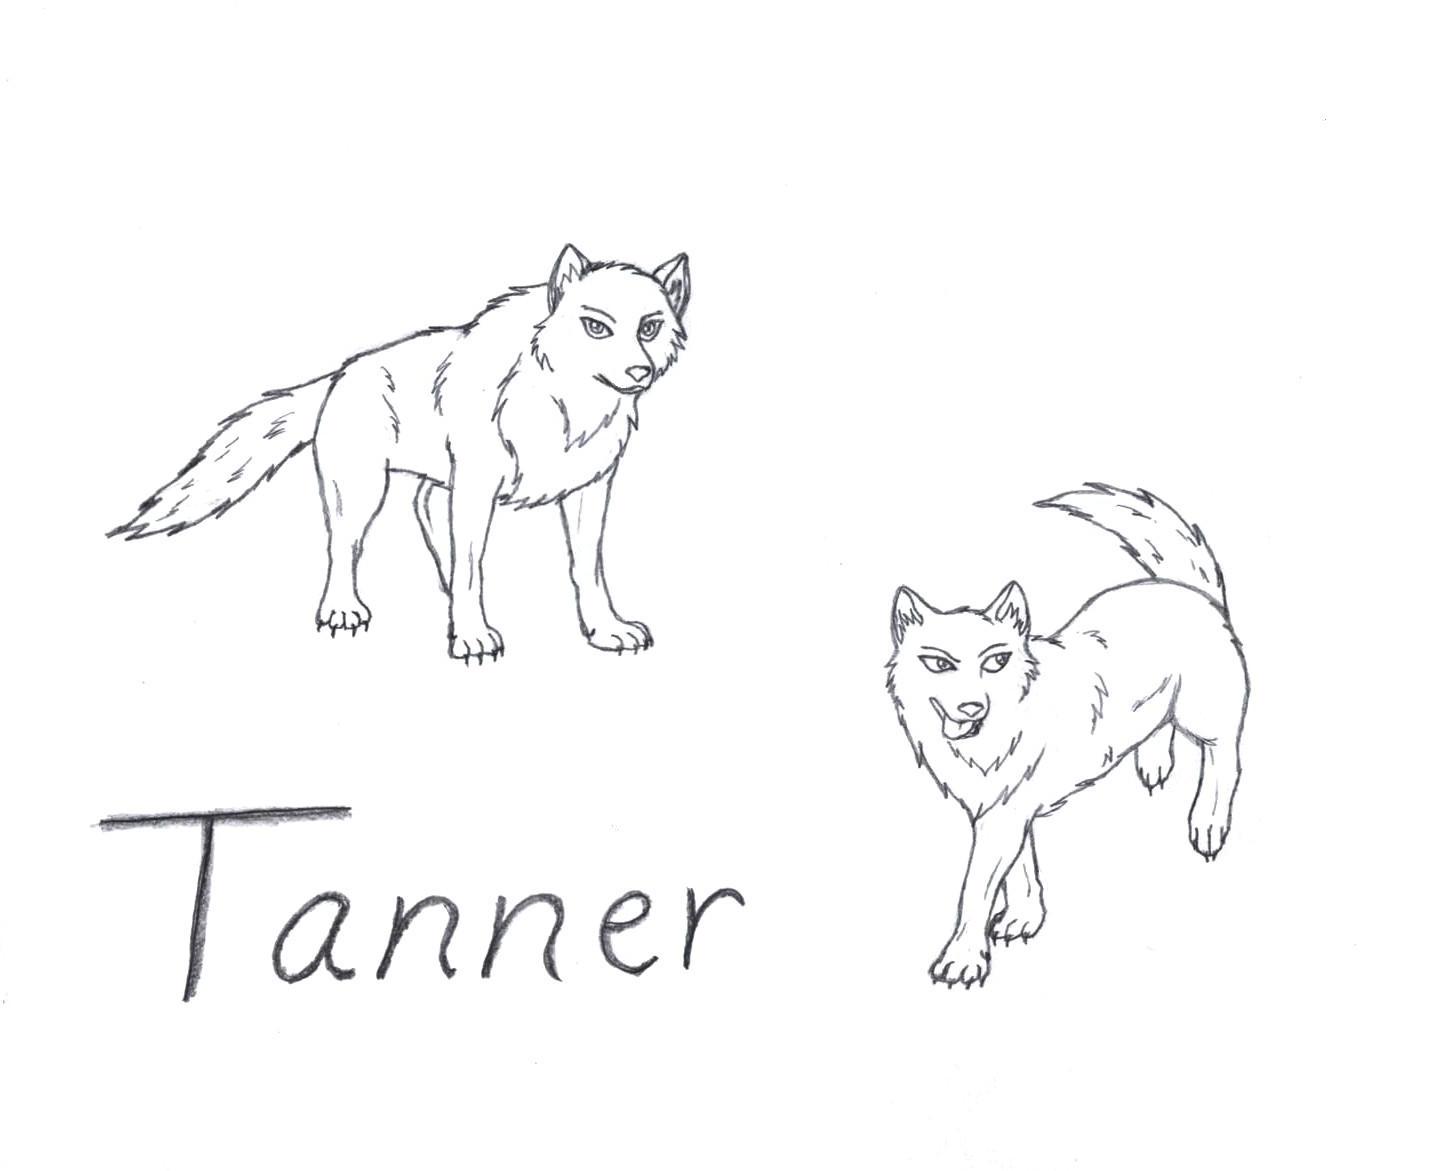 Tanner - sketches by mikita_inugirl